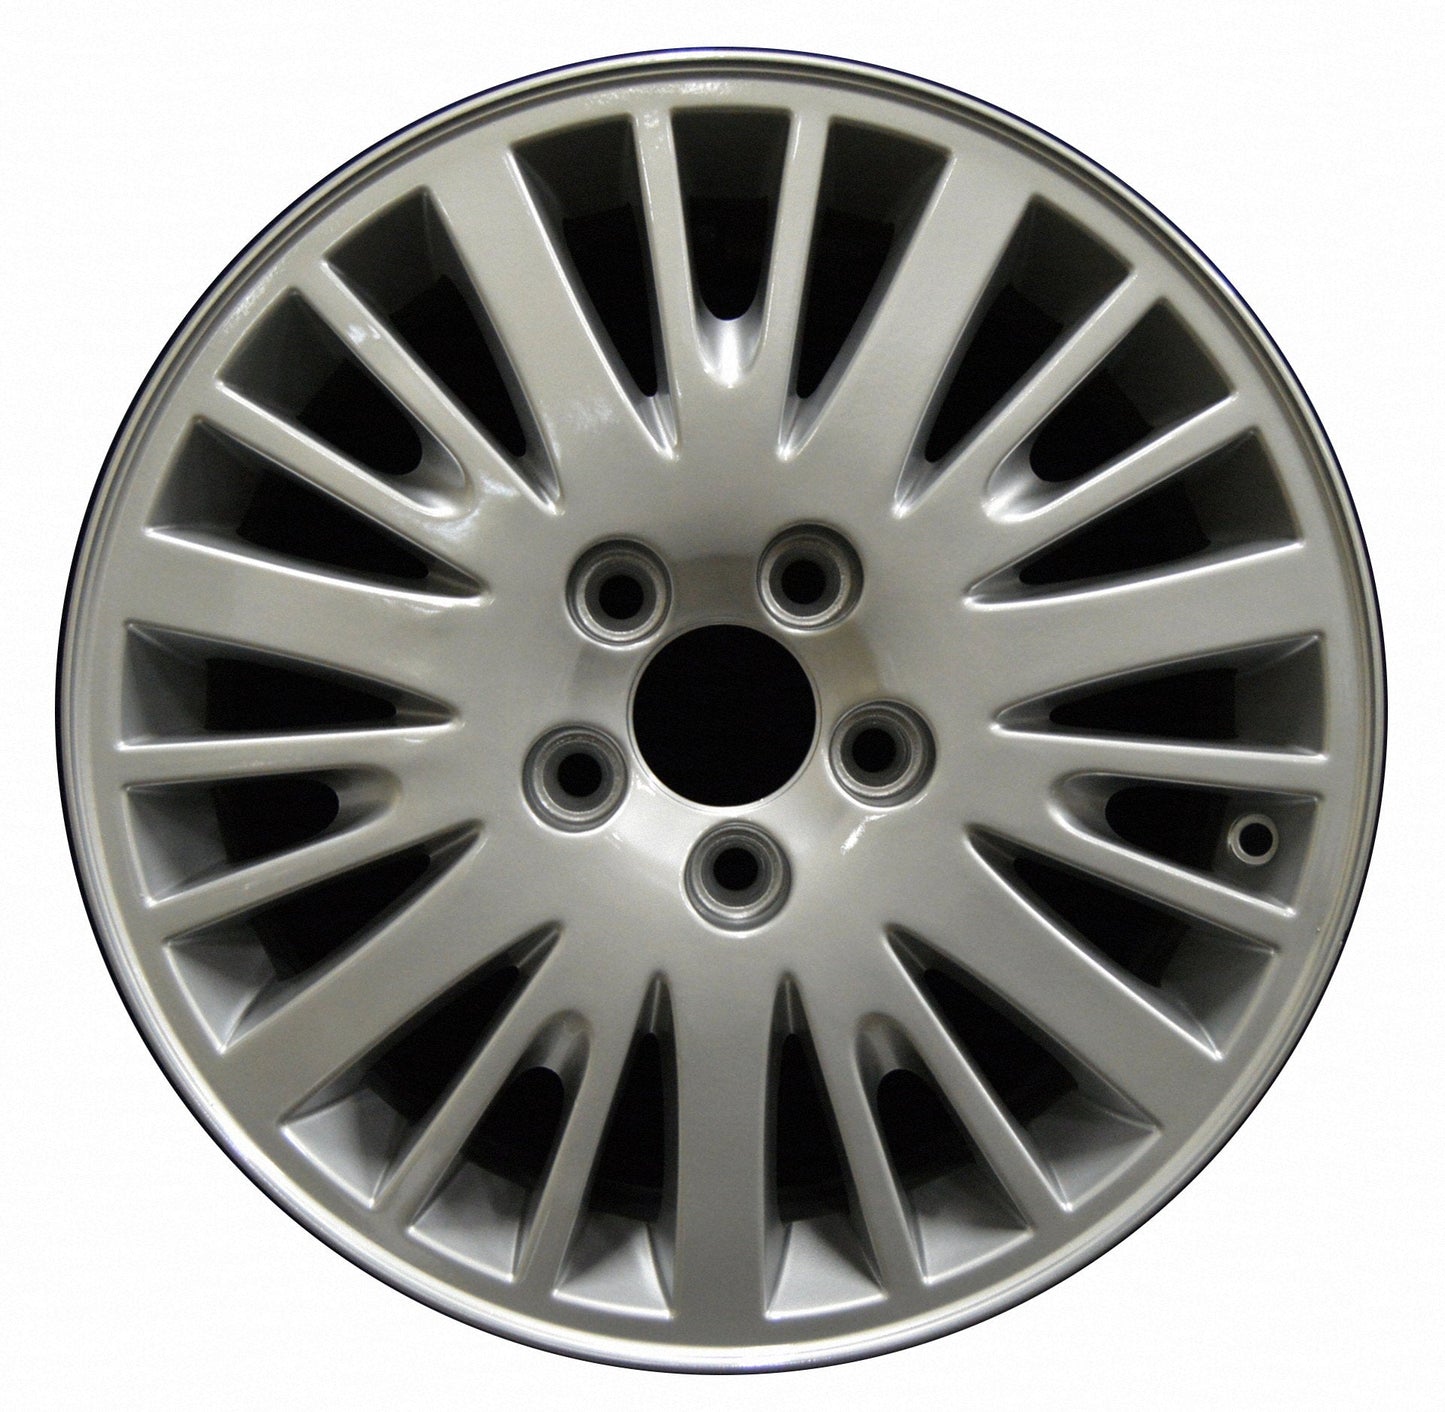 Volvo 80 Series  2004 Factory OEM Car Wheel Size 16x7 Alloy WAO.70268.PS11.FF